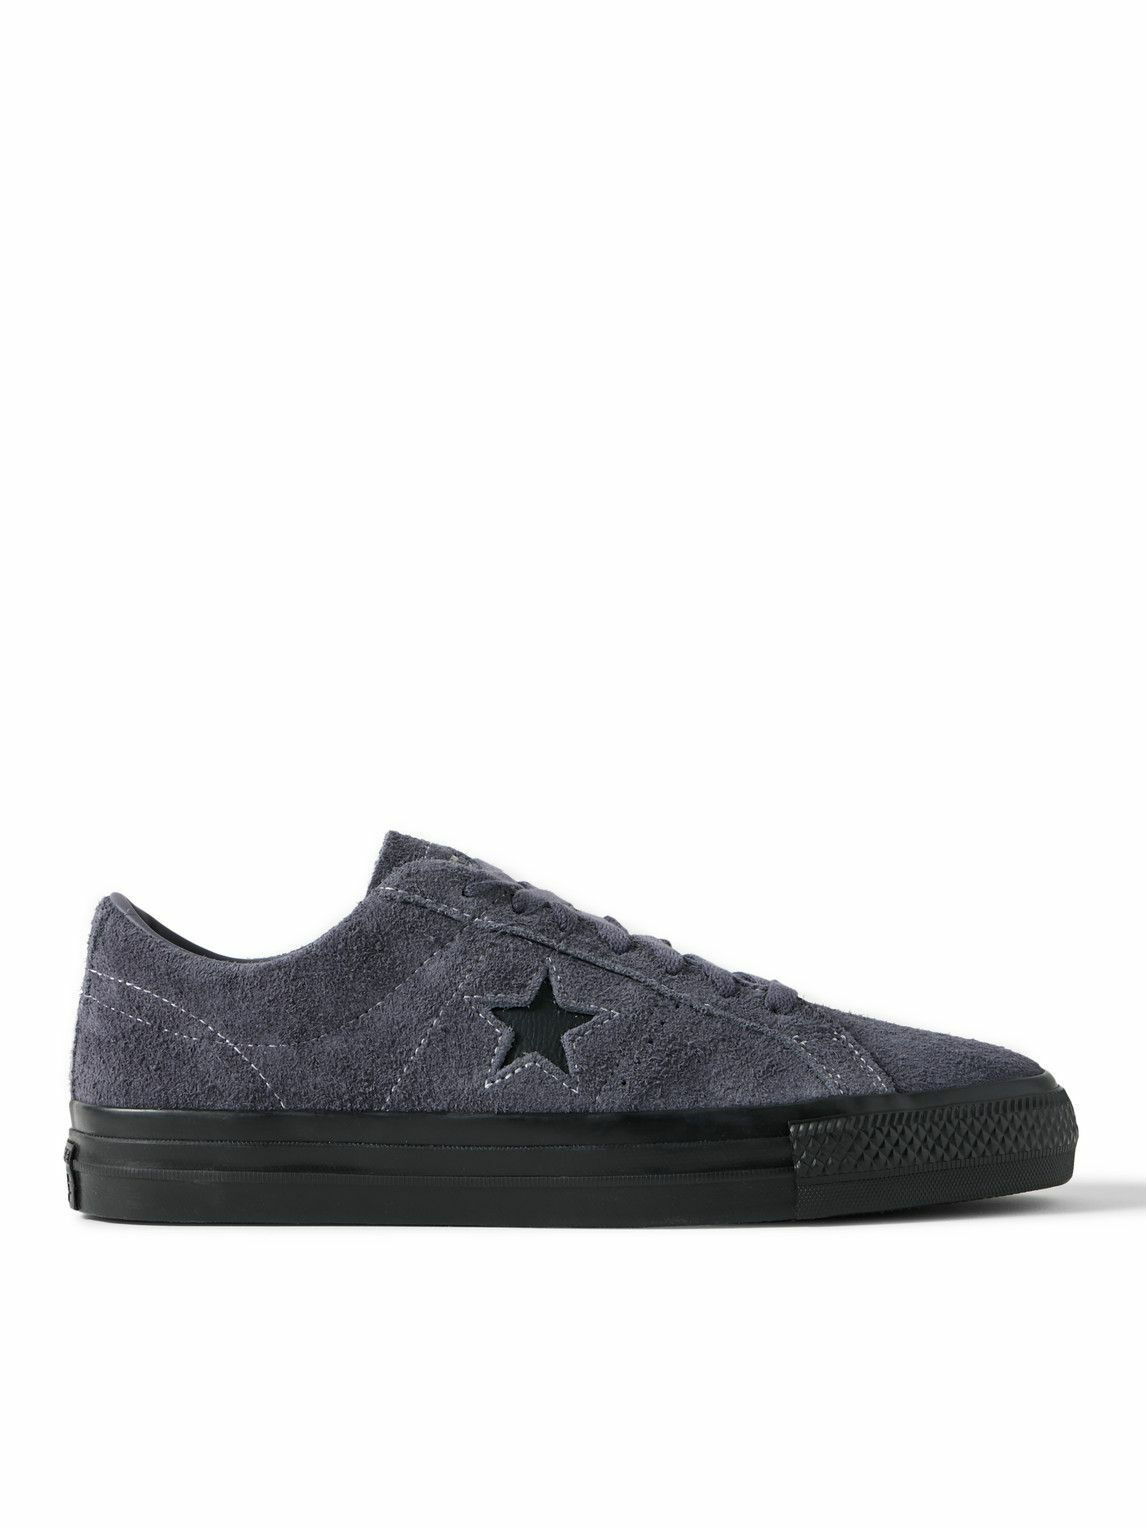 Converse - One Star Pro Leather-Trimmed Suede Sneakers - Blue Converse